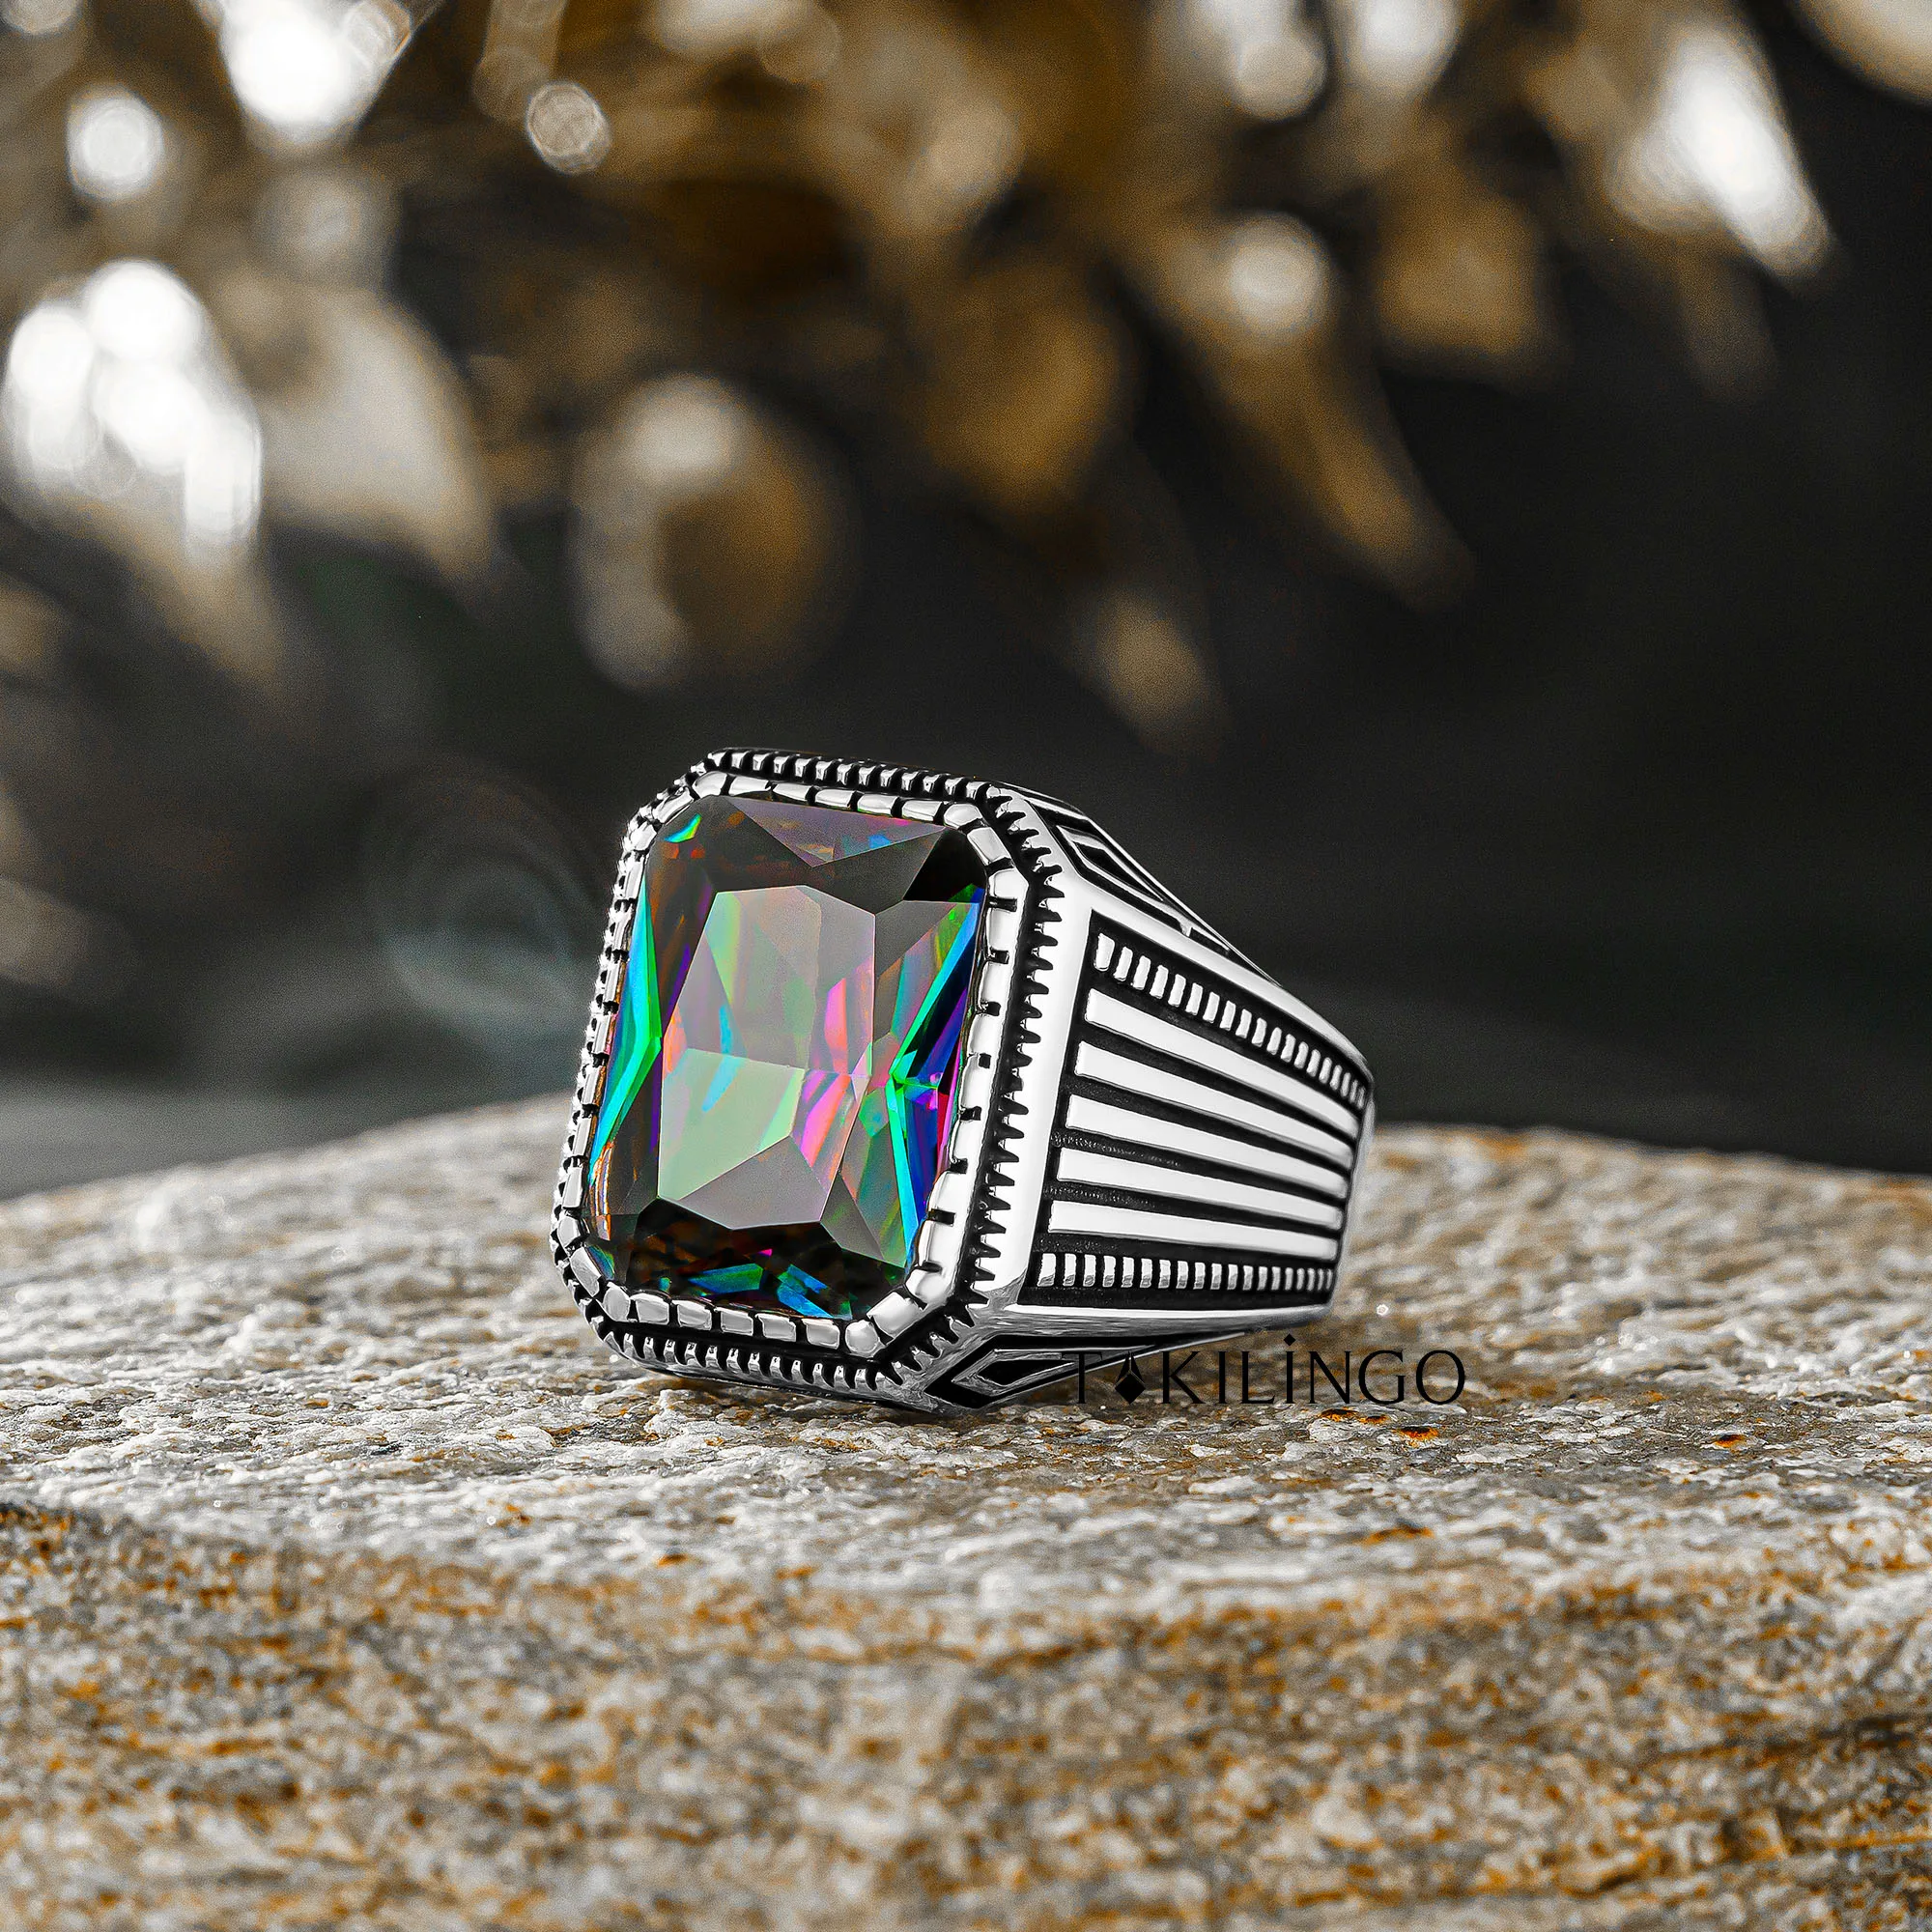 Elegant Design Solid 925 Sterling Silver Rectangle Mystic Topaz Men's Ring Business High Quality Handmade Jewelry Gift For Him